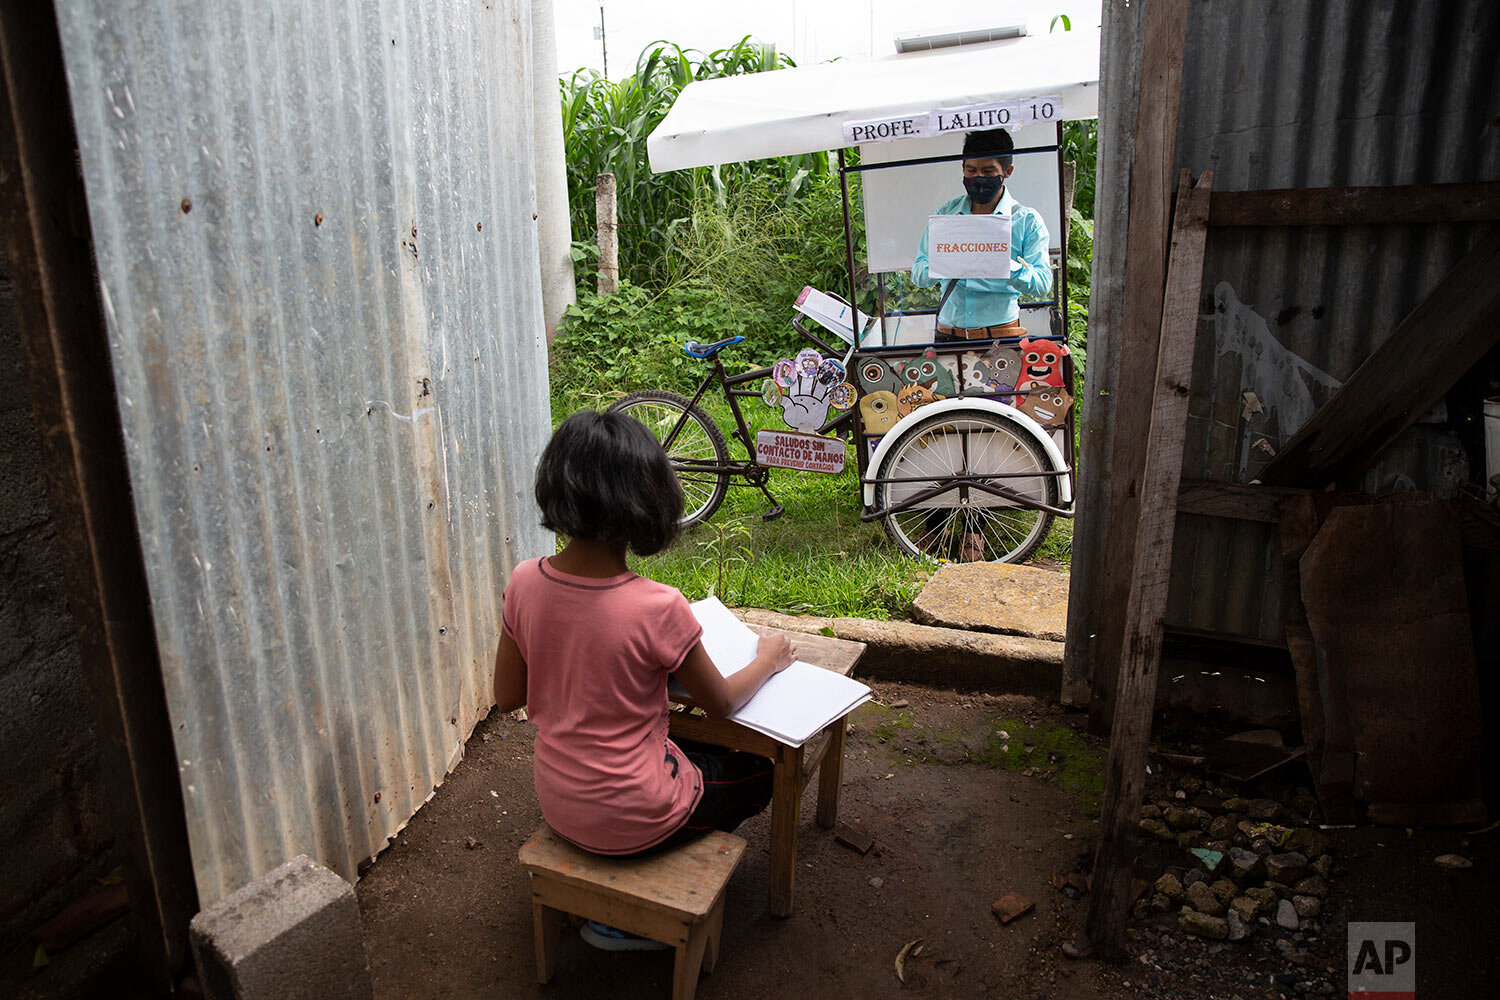  Gerardo Ixcoy teaches 12-year-old student Paola Ximena Conoz about fractions from his mobile classroom, parked just outside the door to her home in Santa Cruz del Quiche, Guatemala, Wednesday, July 15, 2020. Each day the 27-year-old sets out pedalin